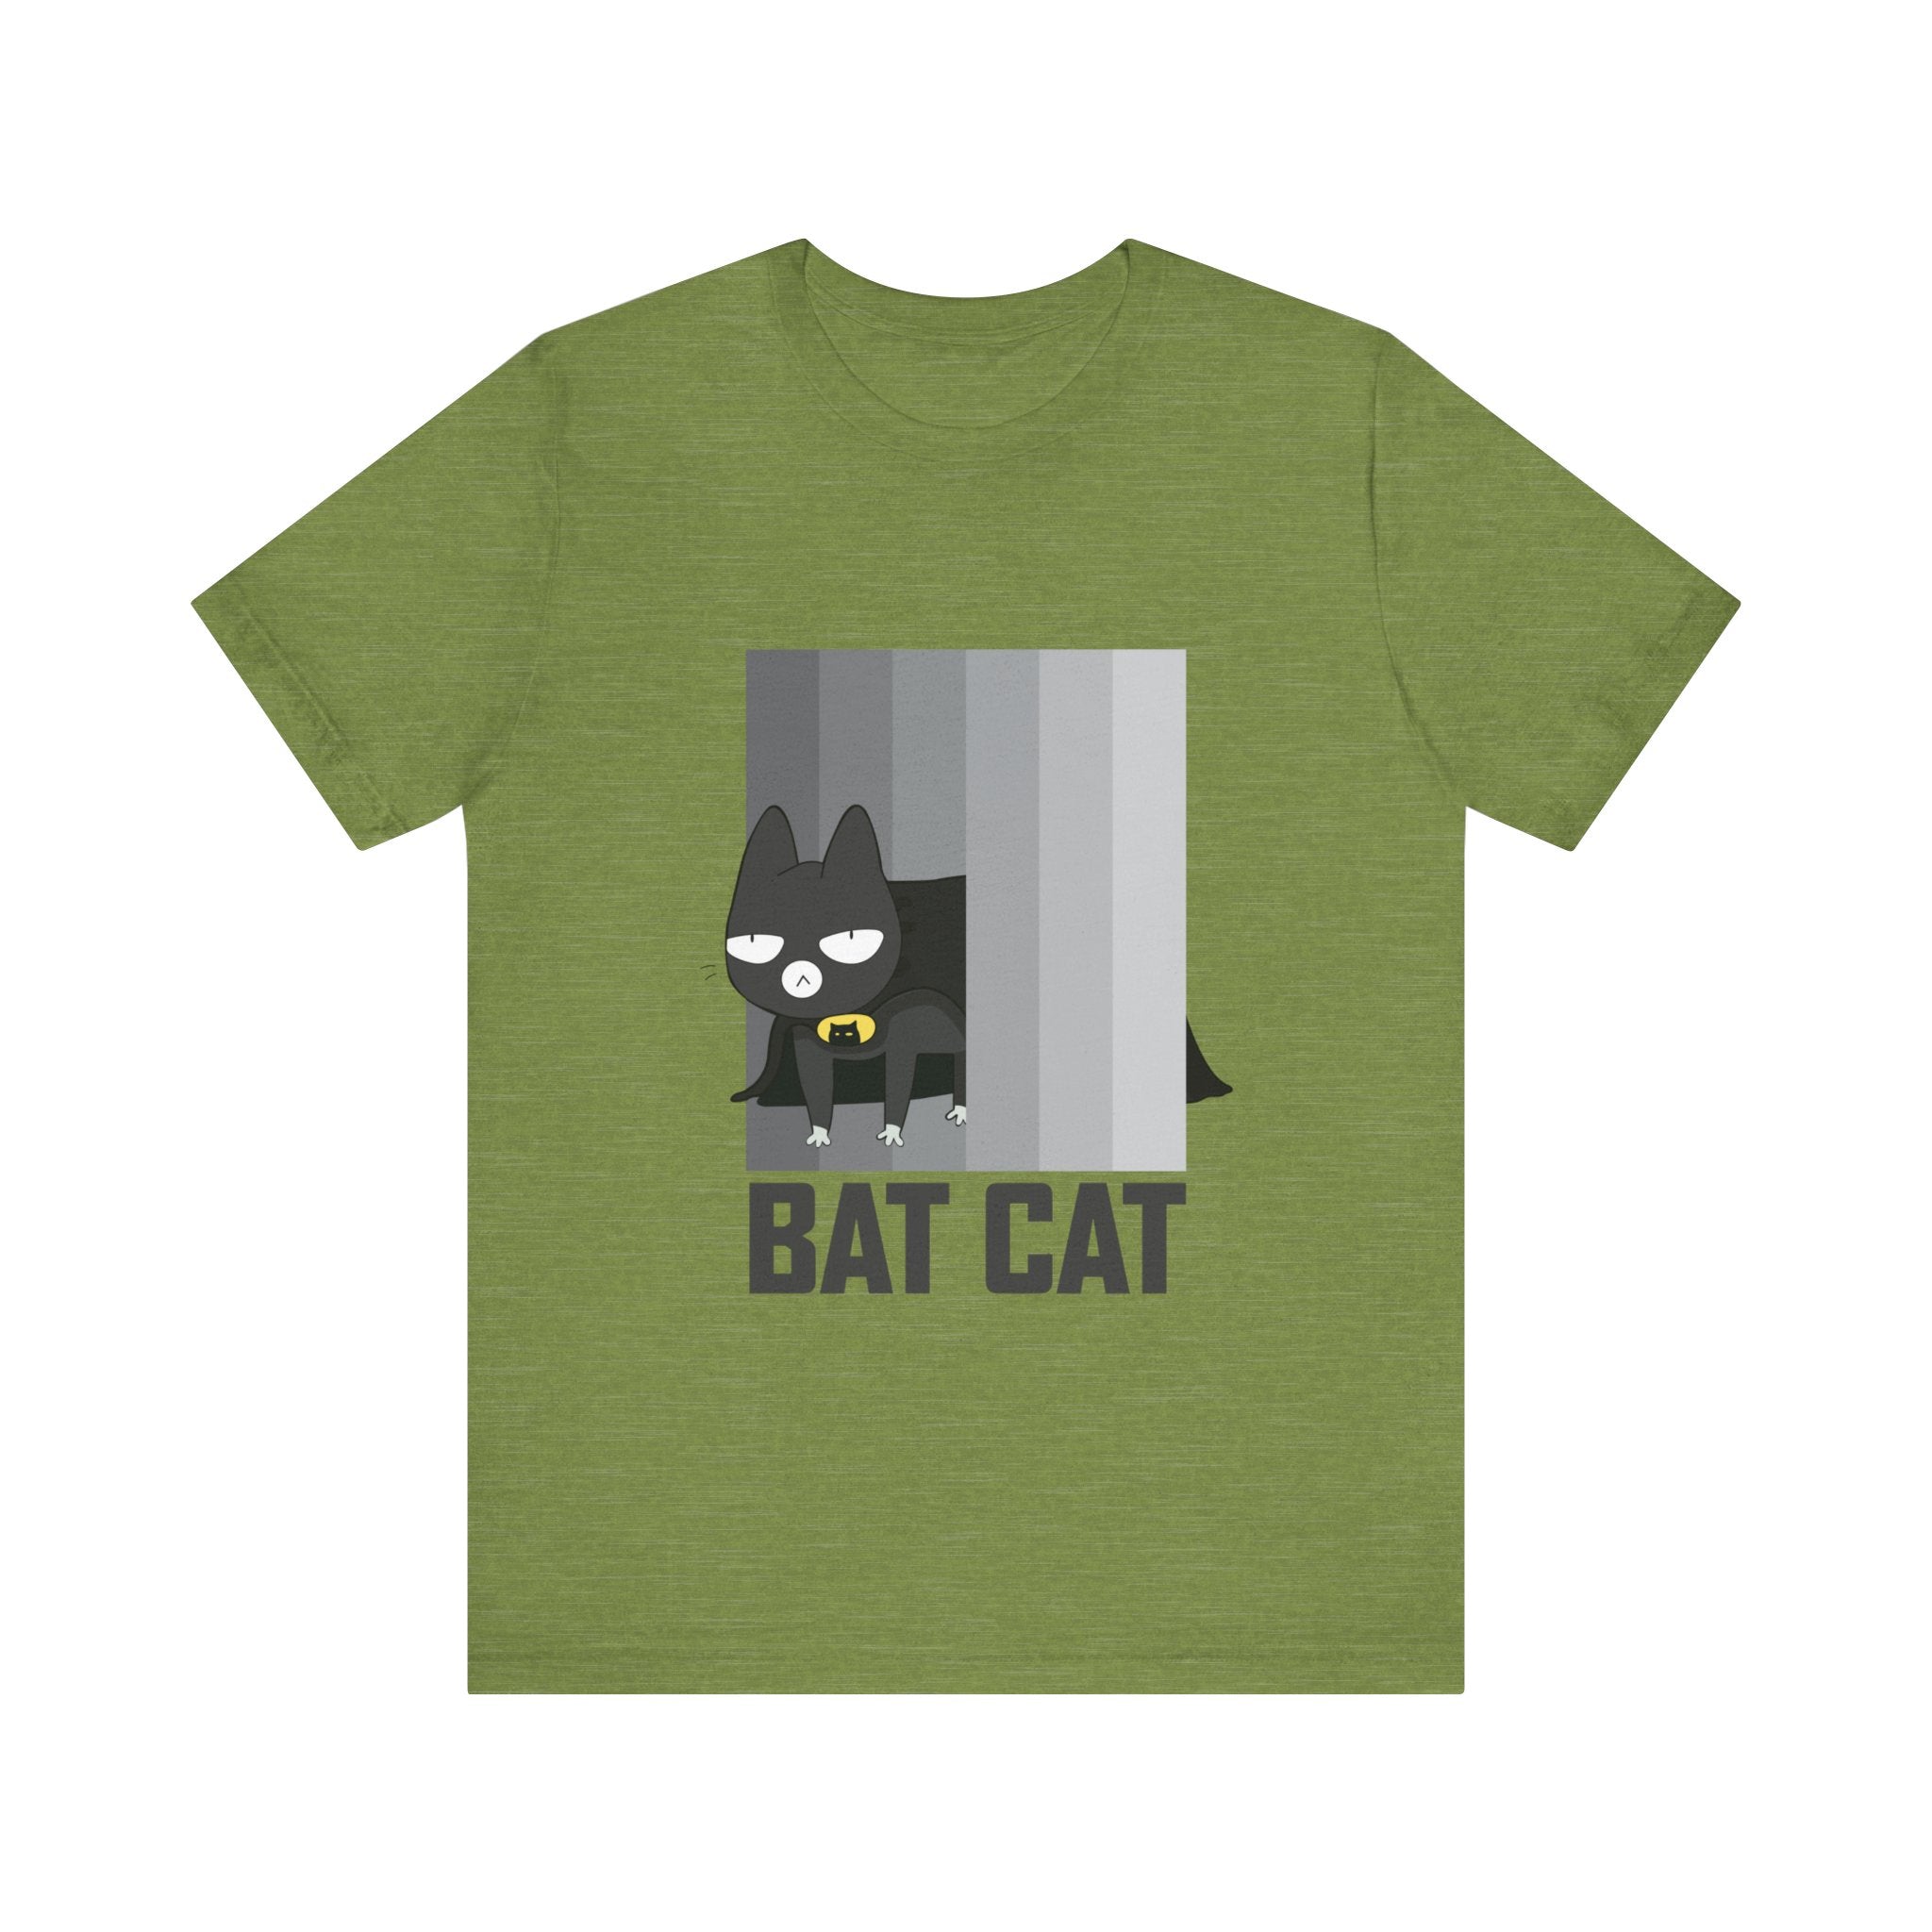 Unisex tee featuring a cartoon of a black cat dressed as a bat, with the words "BATCAT T-shirt" printed below in bold letters.